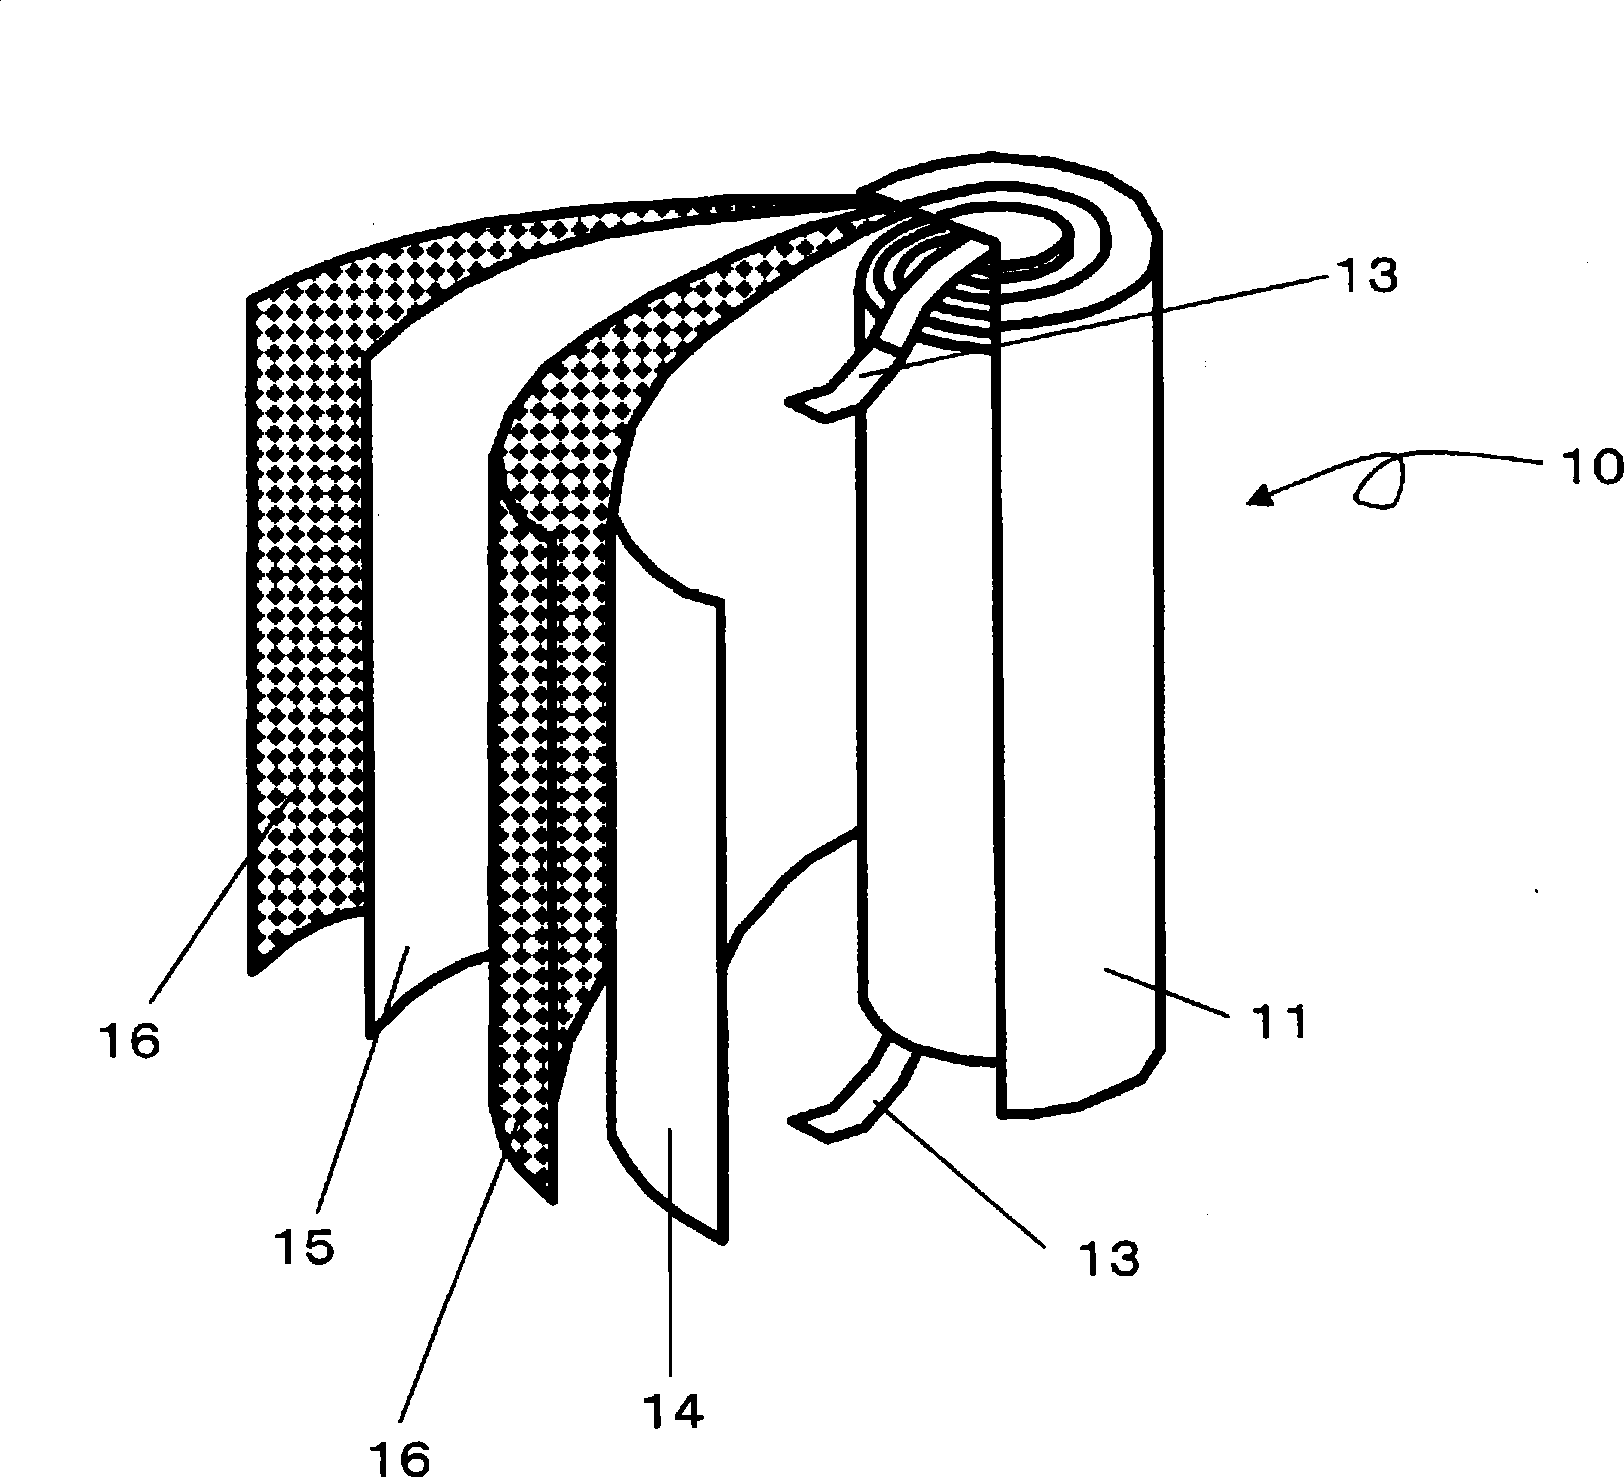 Process for producing roll of microporous plastic film